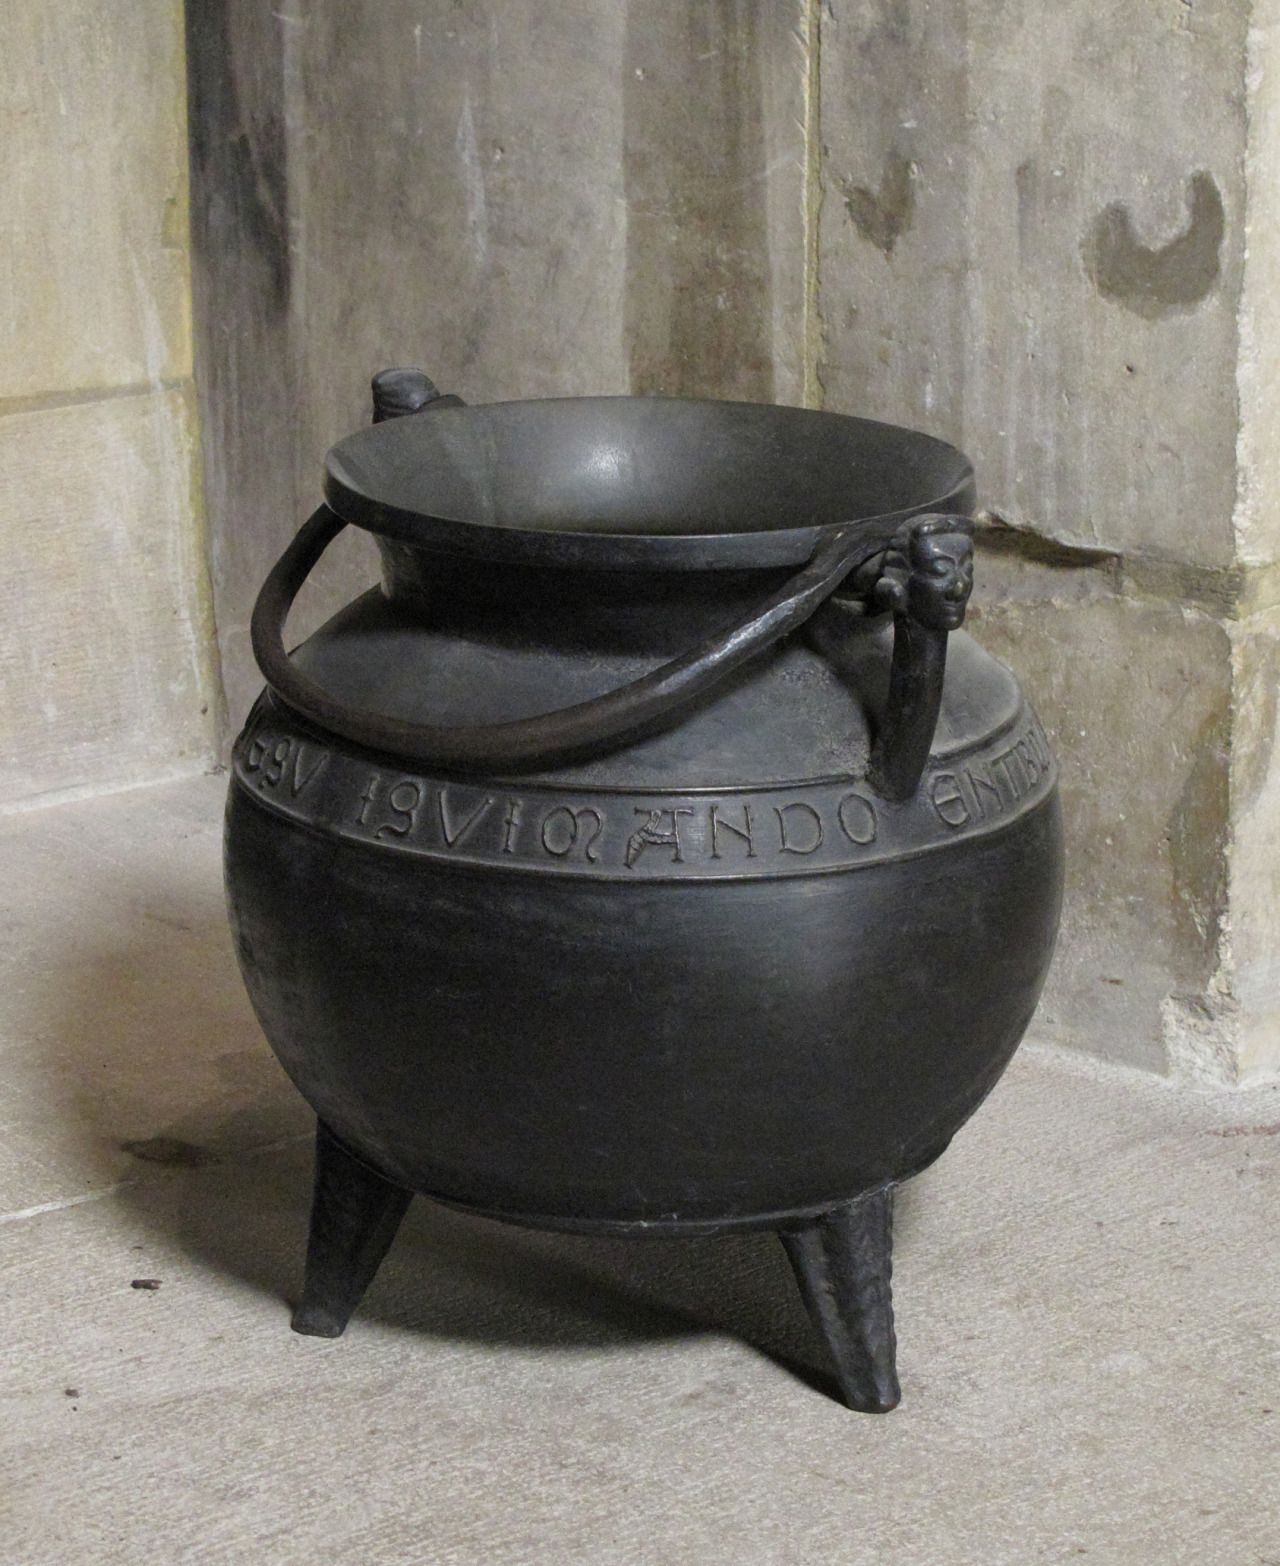 aleyma:  Cauldron, made in France or the Southern Netherlands, 13th or 14th century